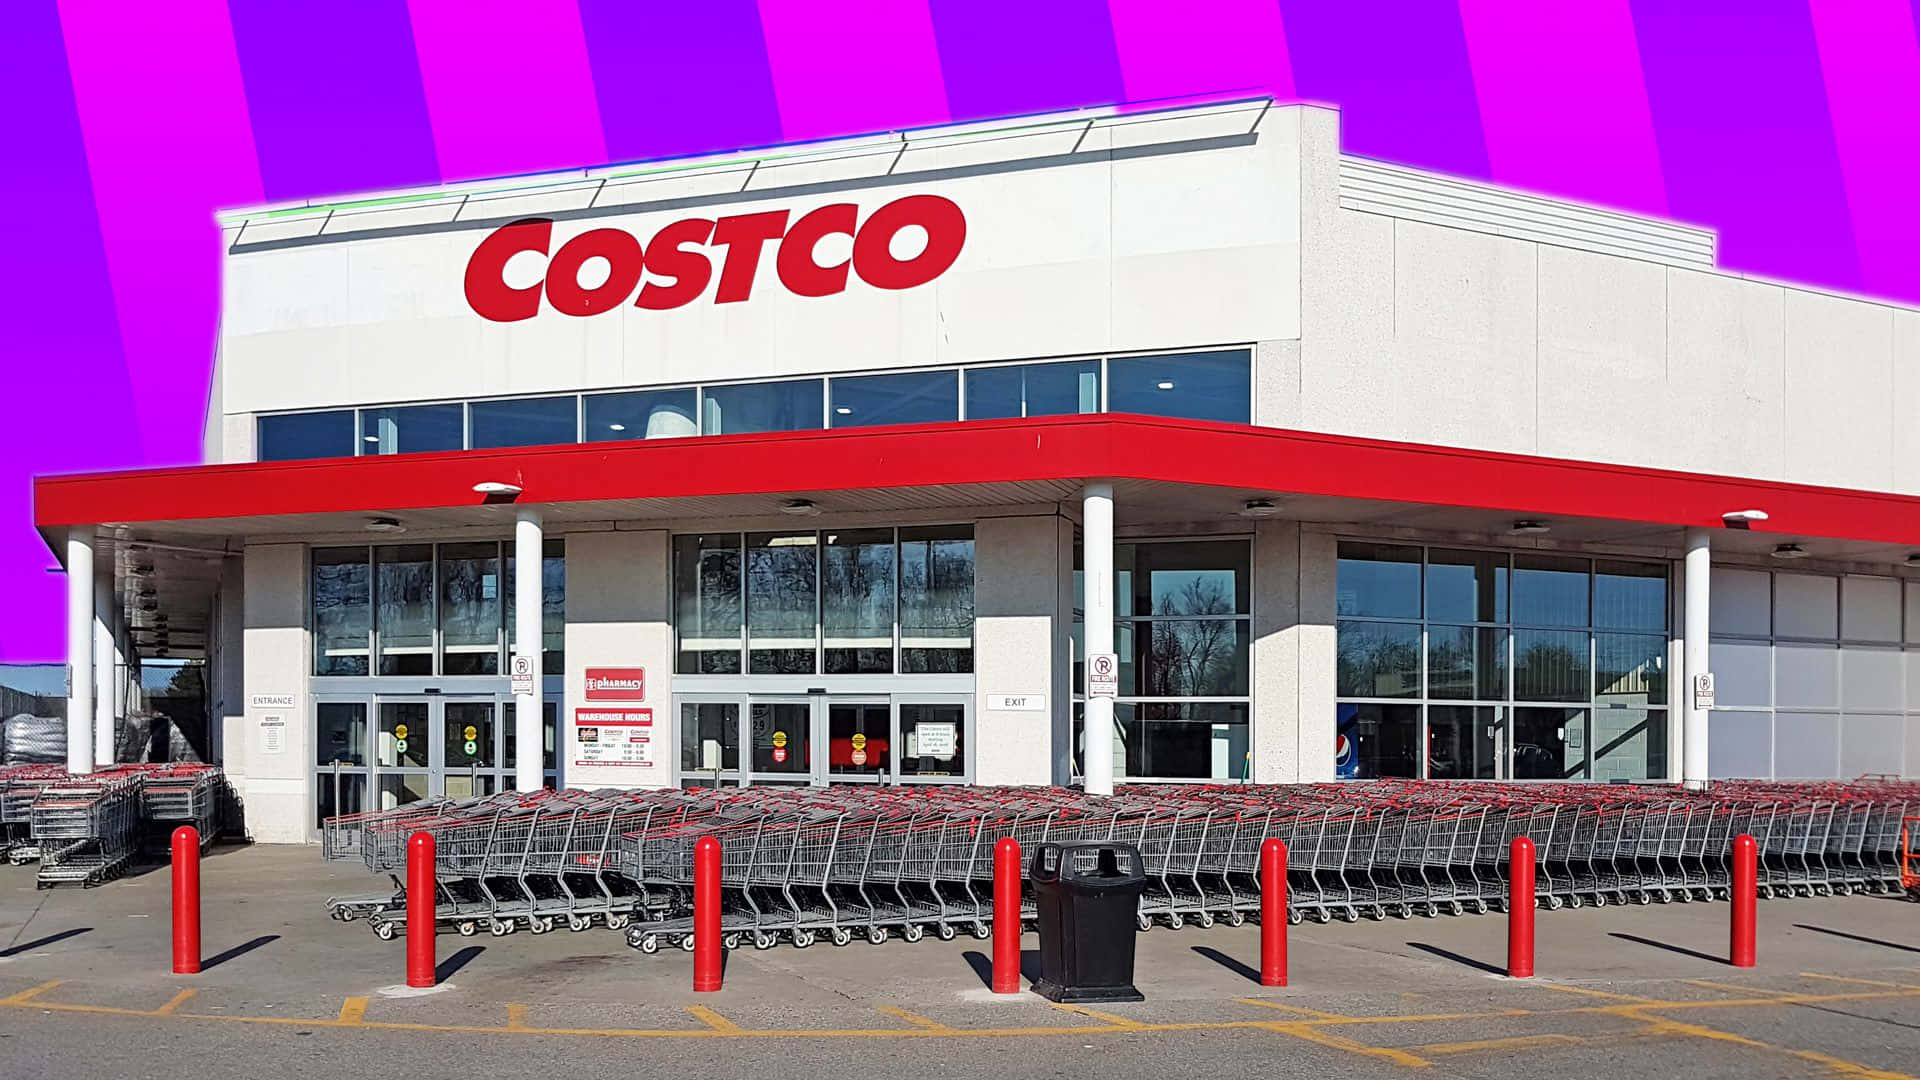 Costco Is A Large Store With A Purple And Pink Background